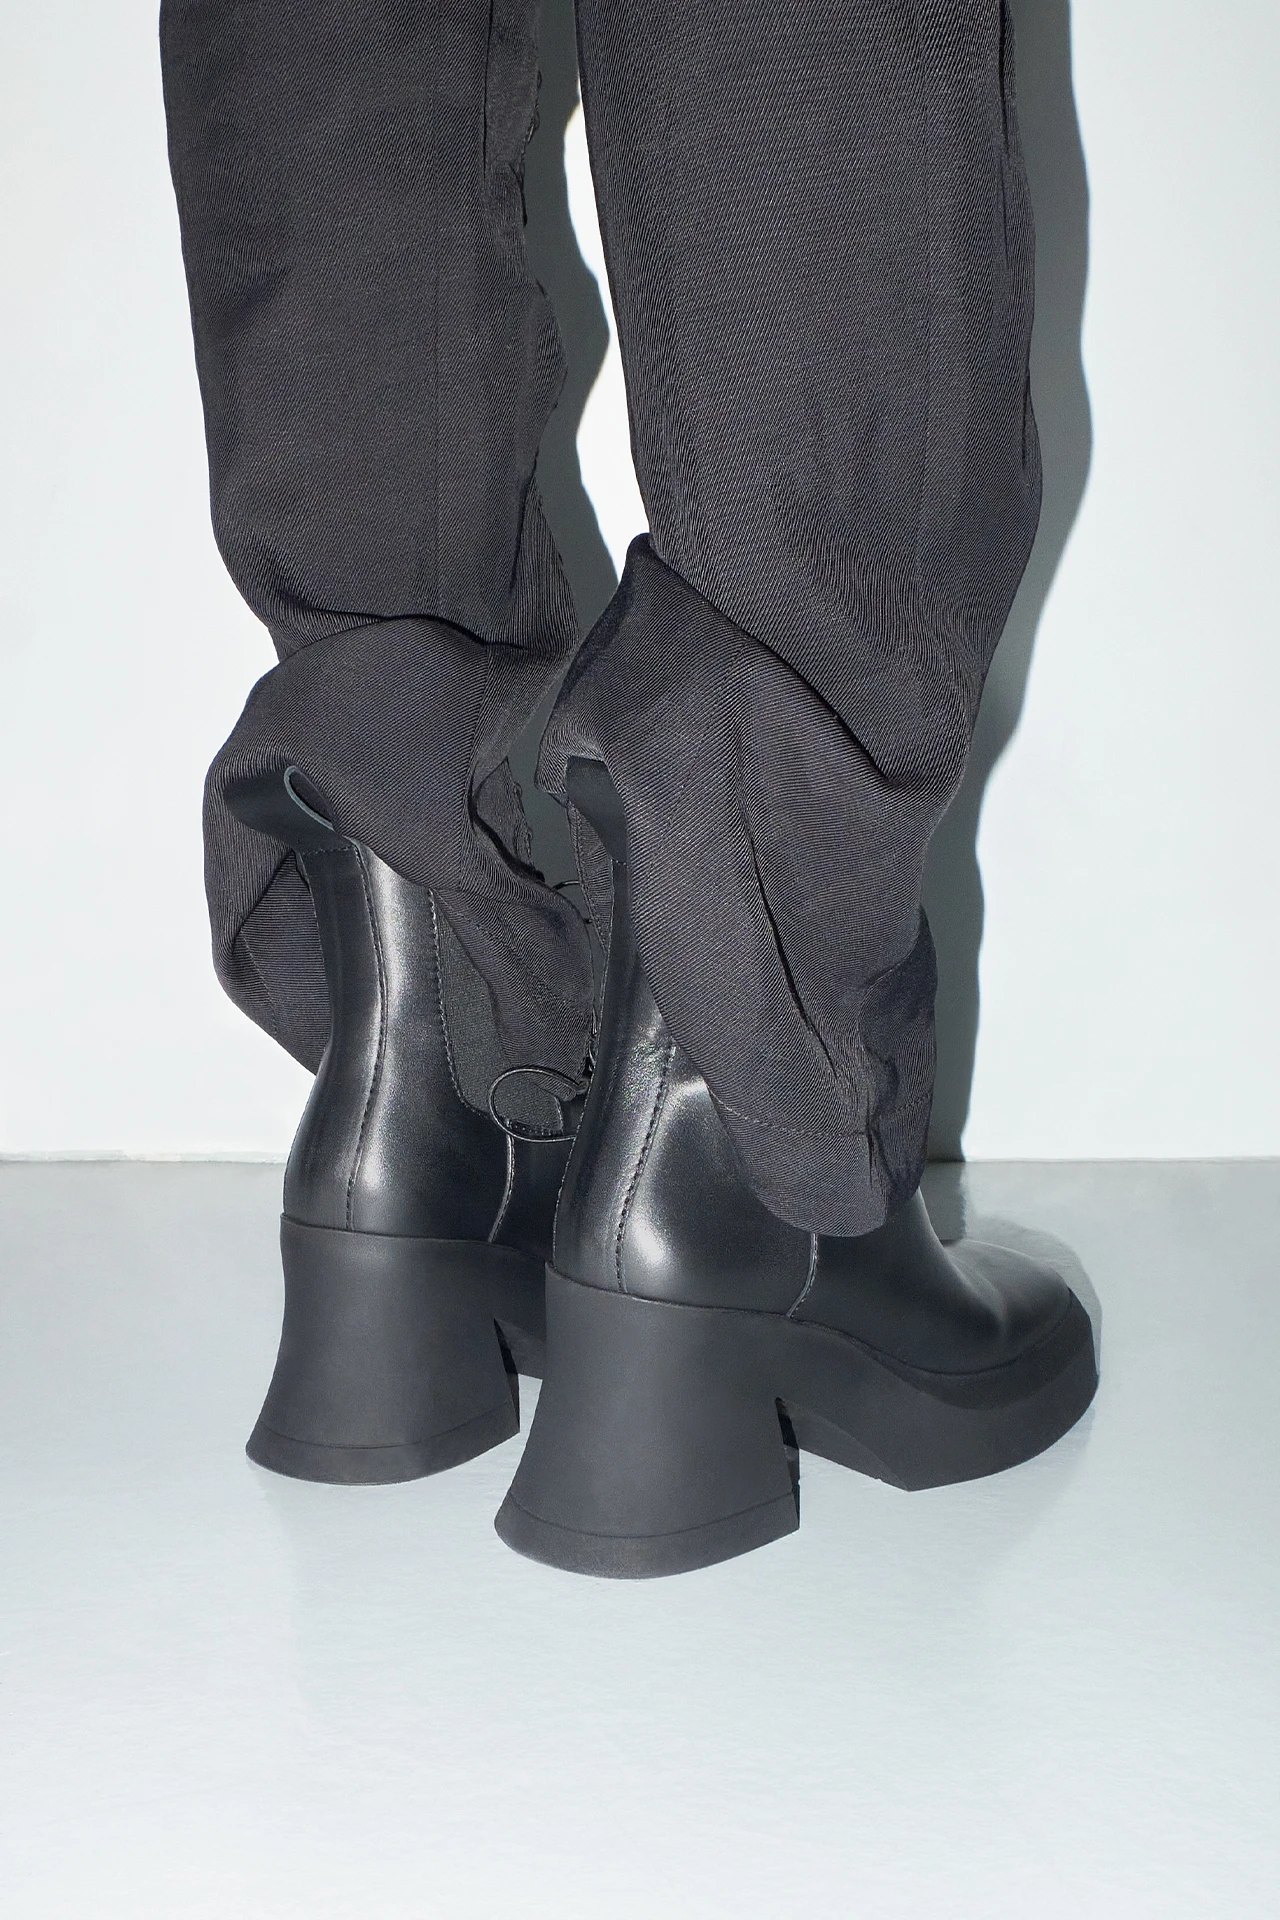 EC-E8-analu--black-ankle--boots-03